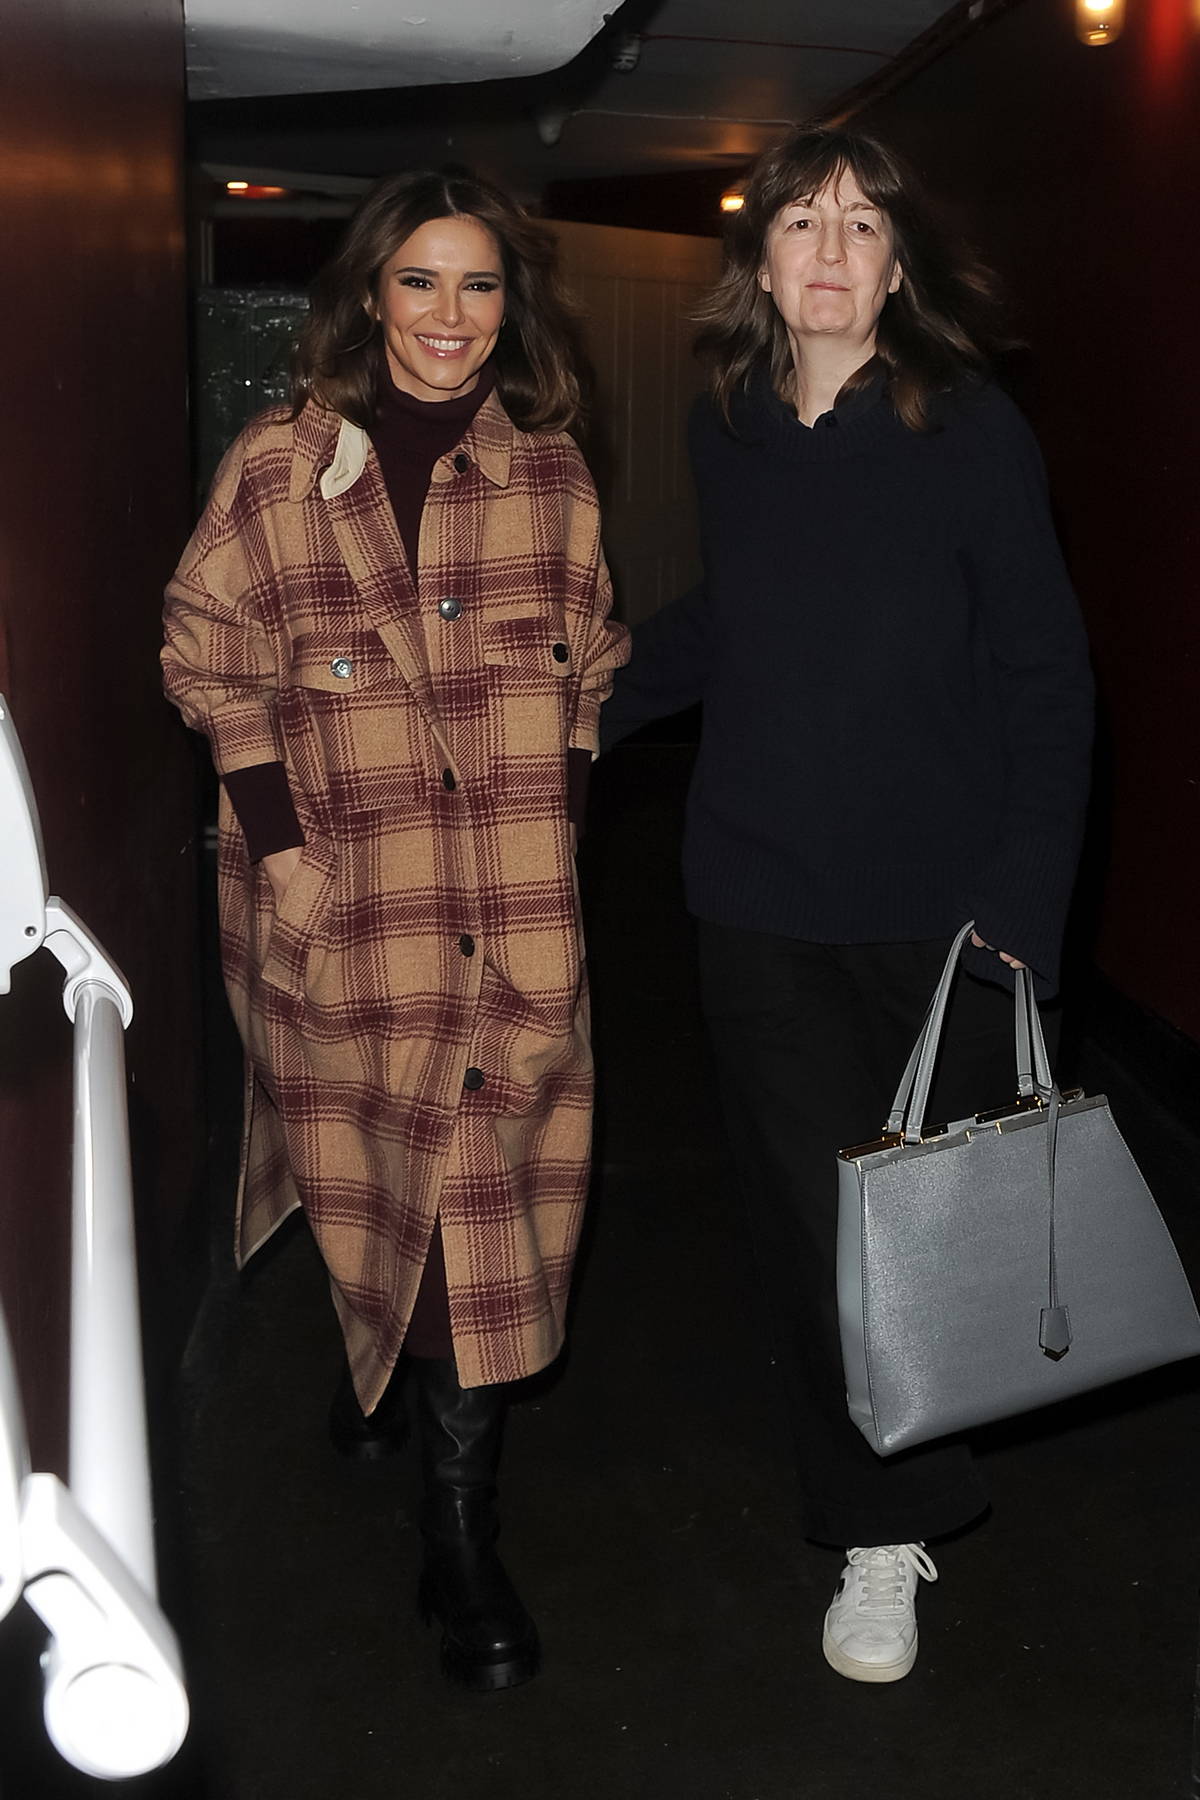 Cheryl Tweedy is all smiles as she leaves the Lyric Theatre in London, UK